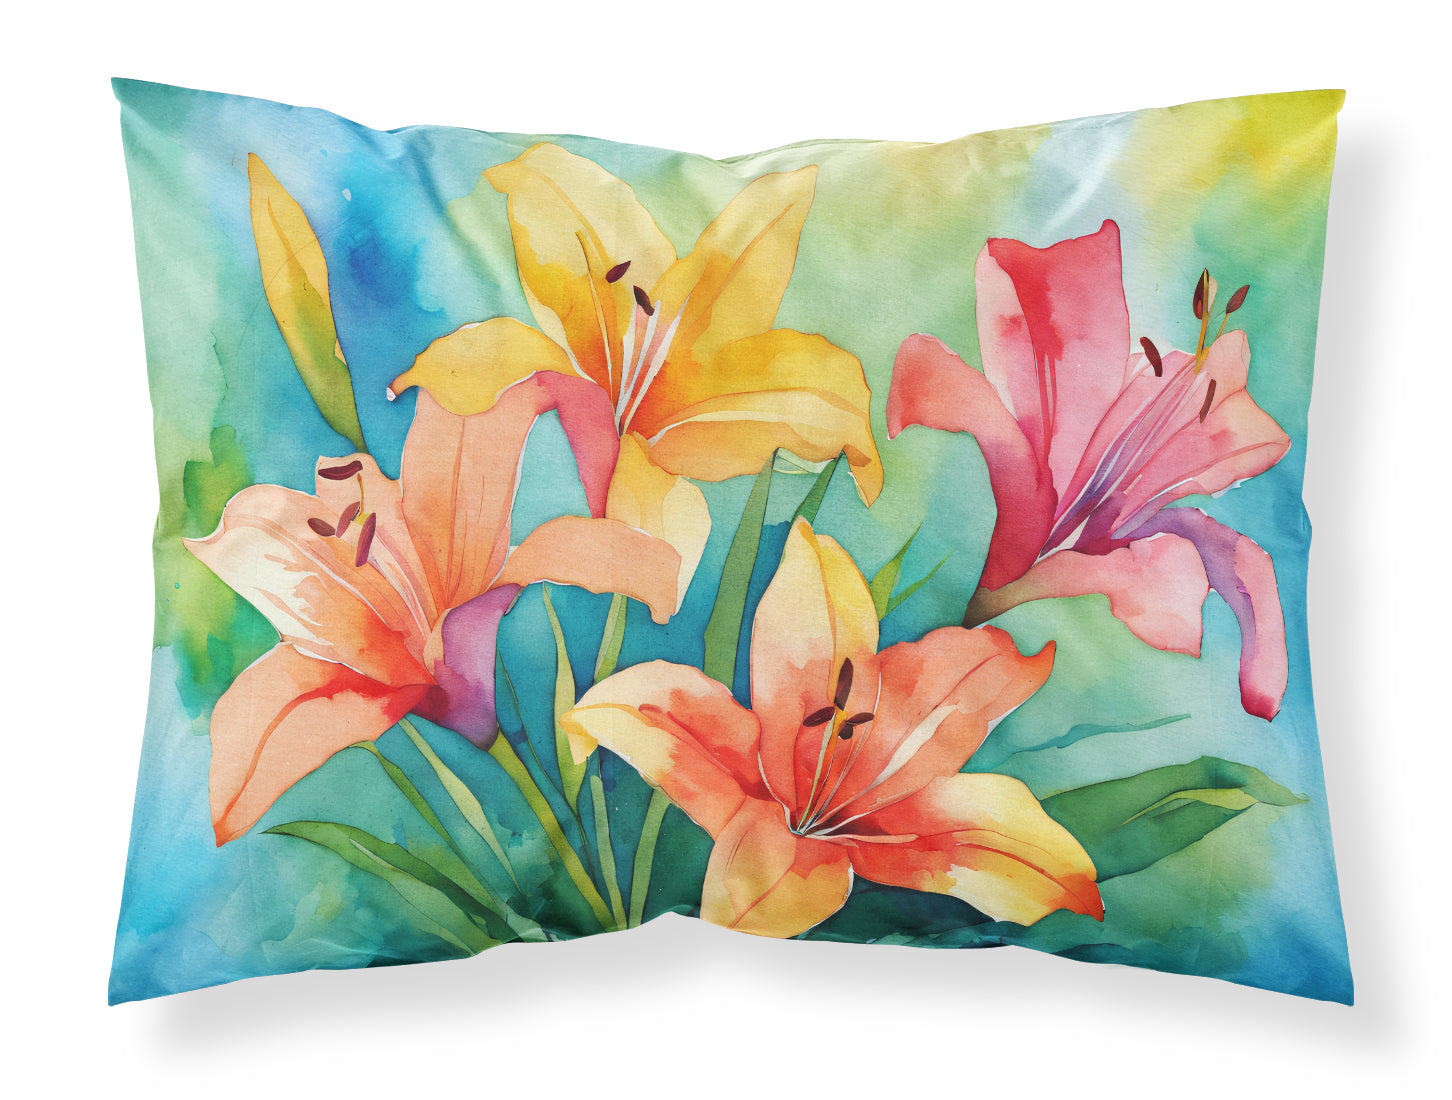 Buy this Lilies in Watercolor Fabric Standard Pillowcase